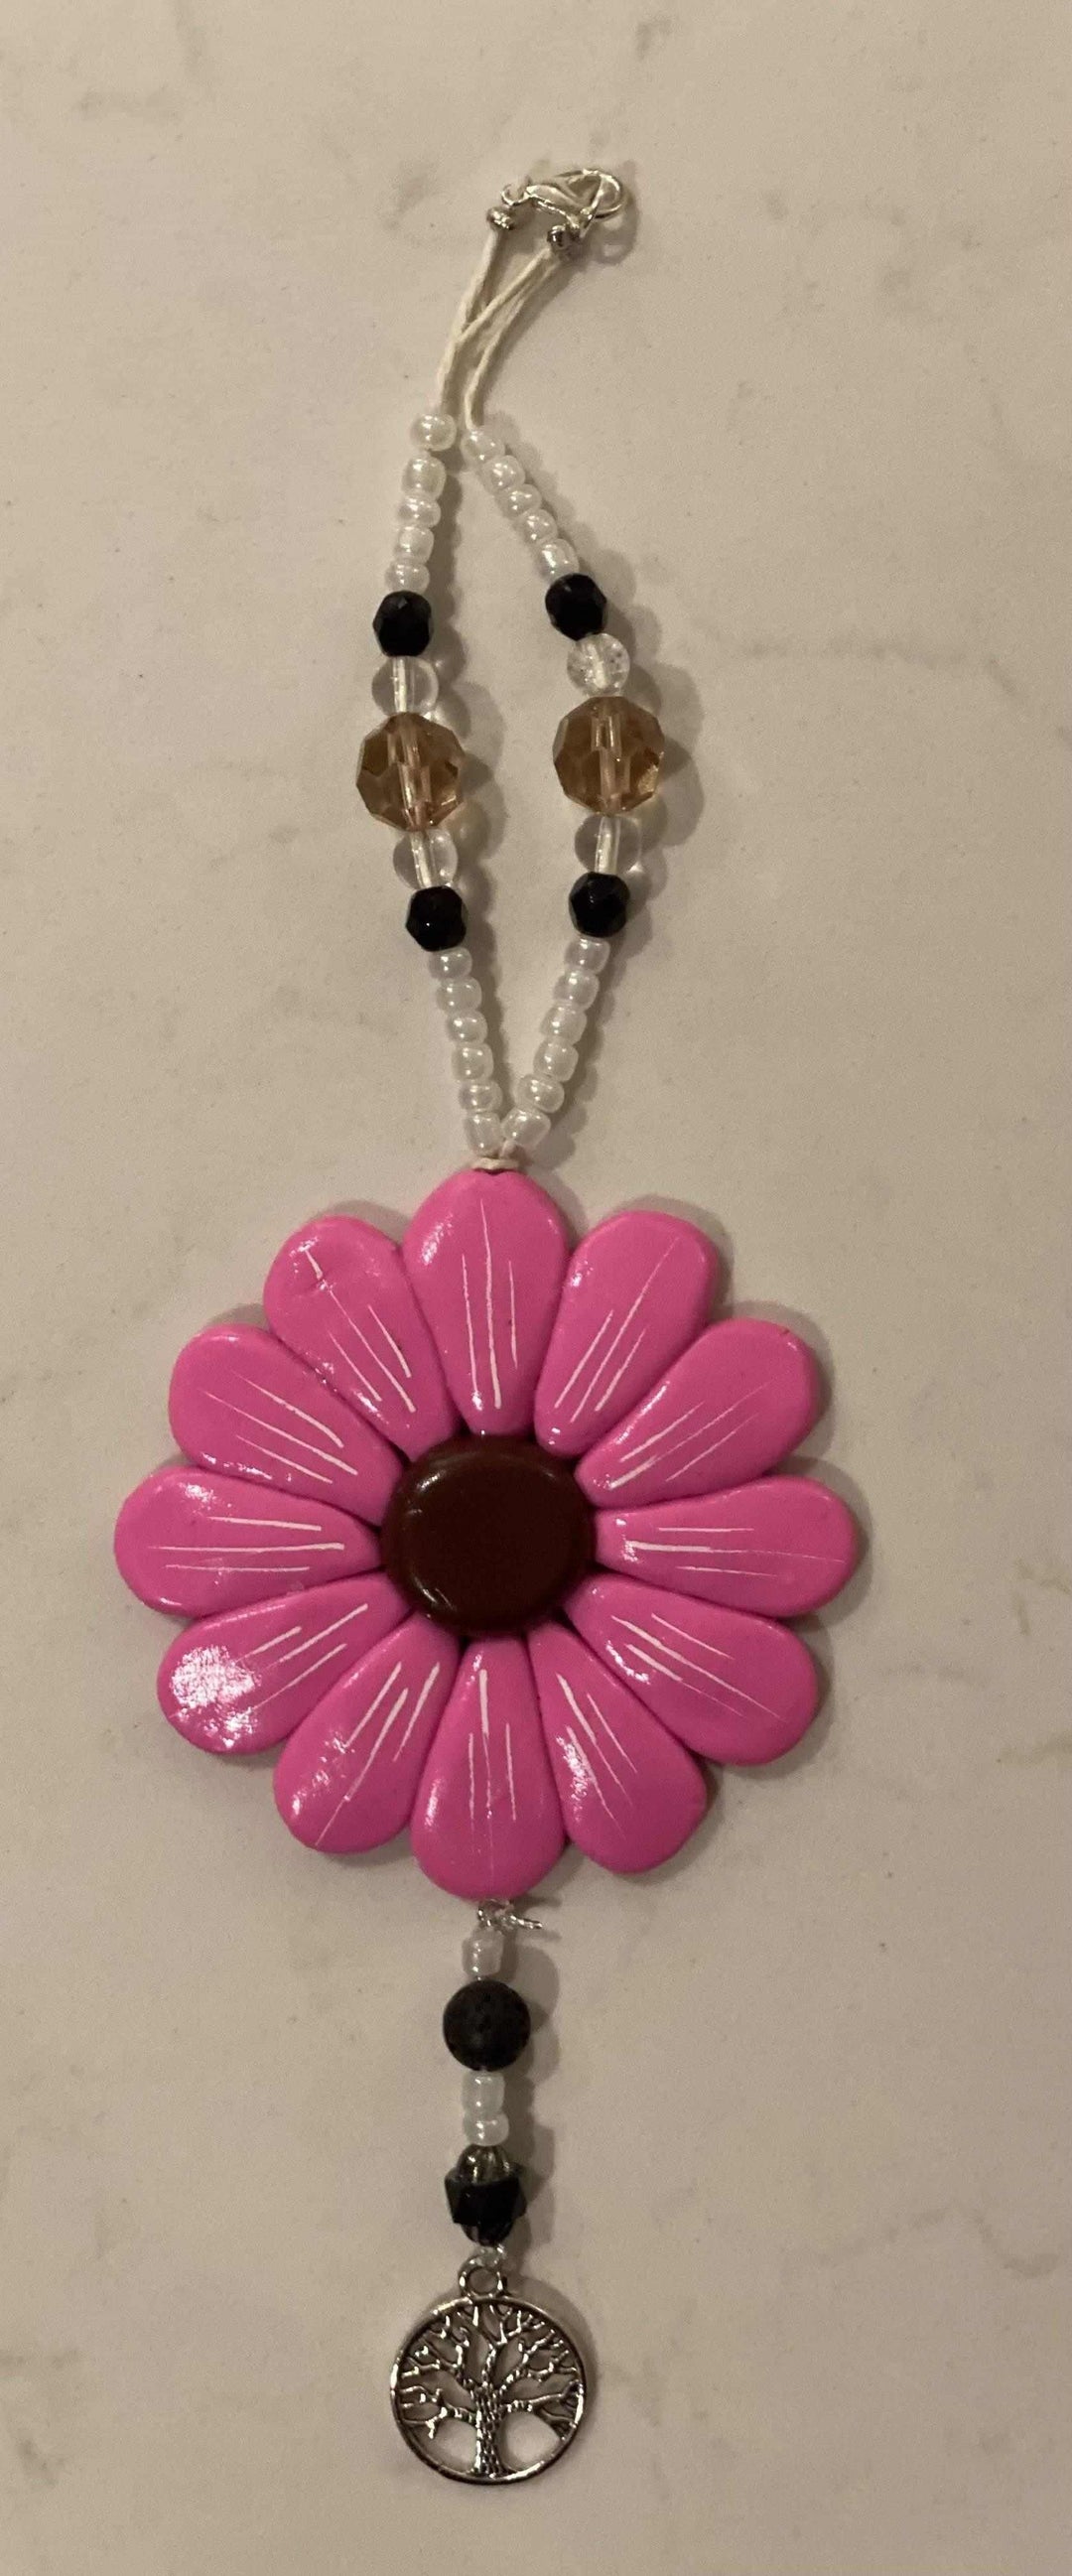 Atlantic Wood N Wares Home & Garden>Home Décor>Kitchen Accessories Hot Pink Support IWK Foundation with Sofia Daisy Charms! Charm01